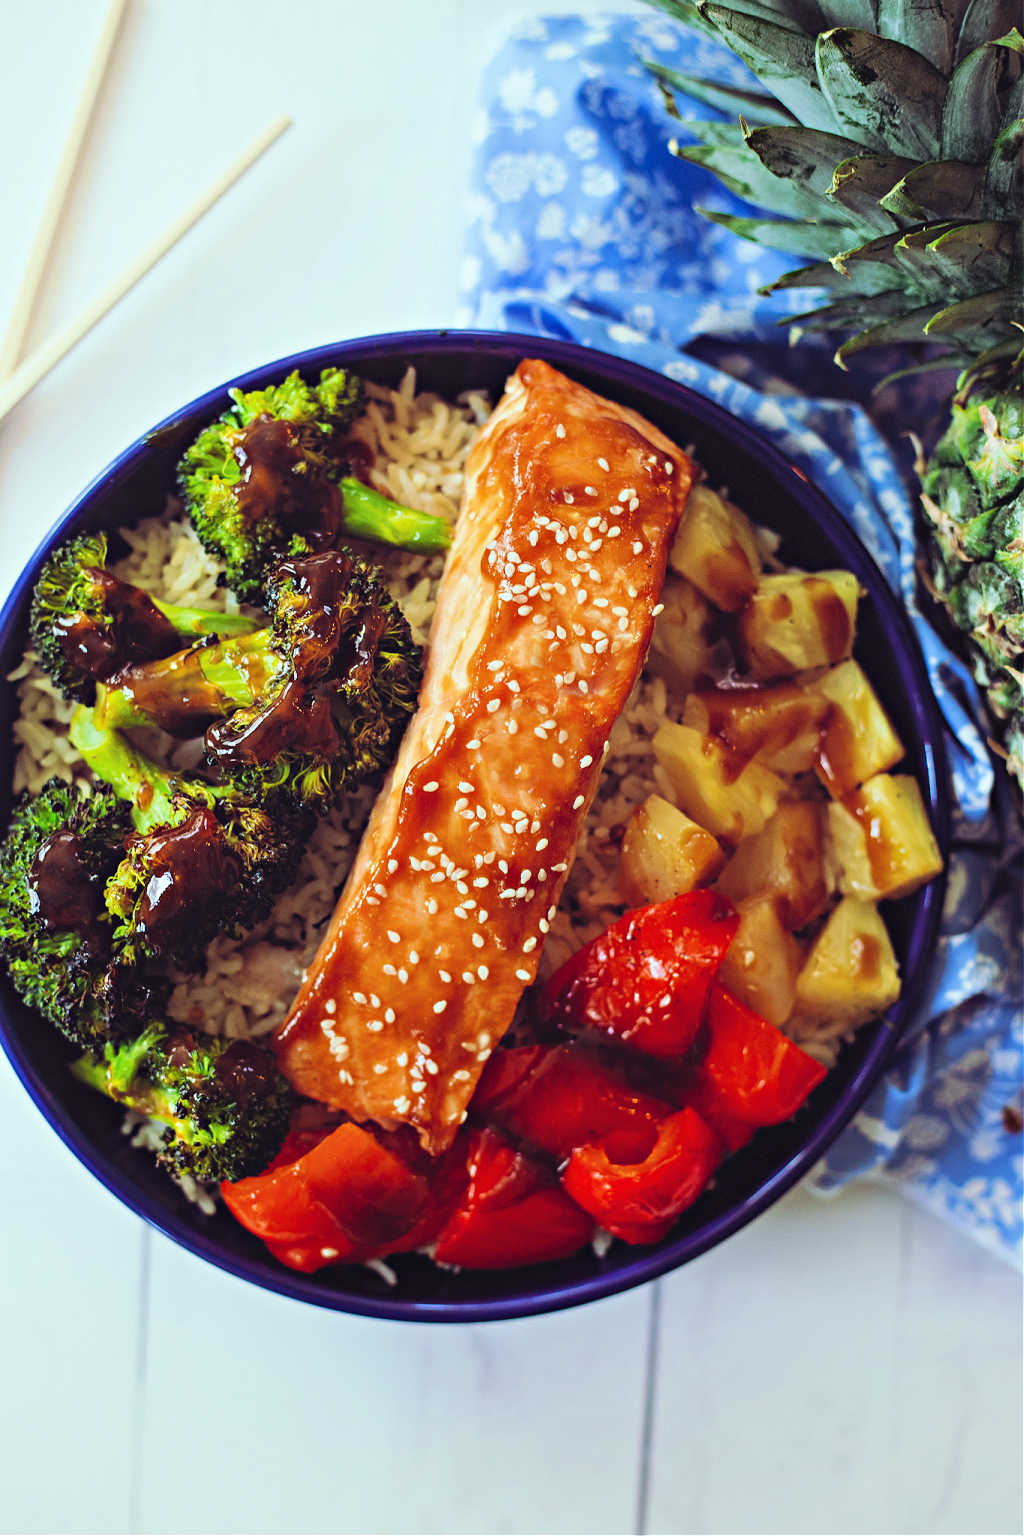 teriyaki salmon in a bowl with brown rice, roasted broccoli, red bell pepper, and pineapple on a wooden table